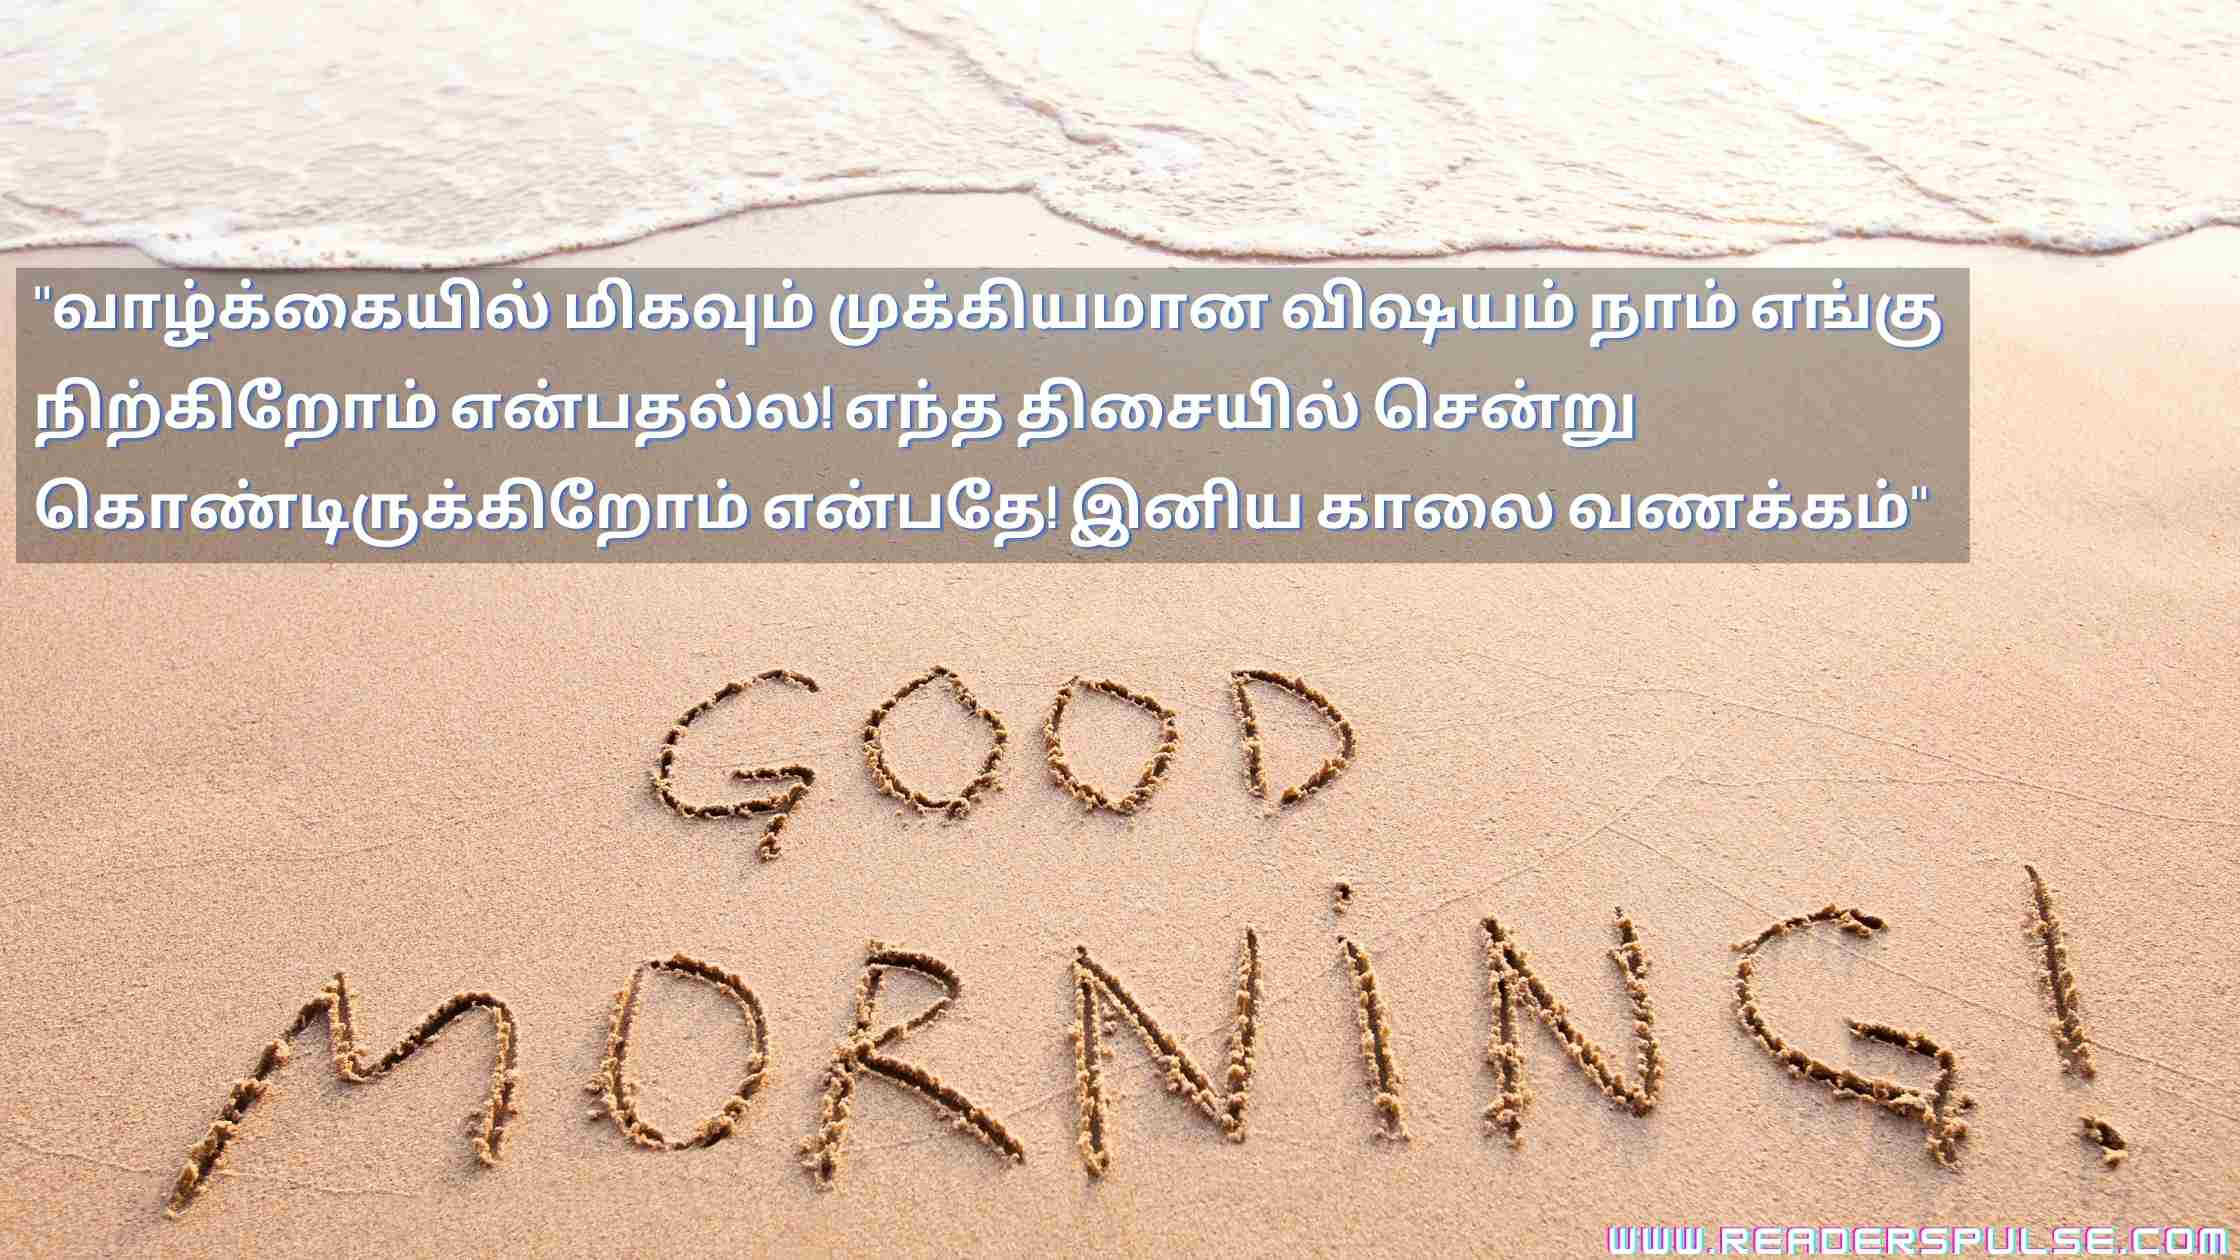 Good Morning Quotes in Tamil 